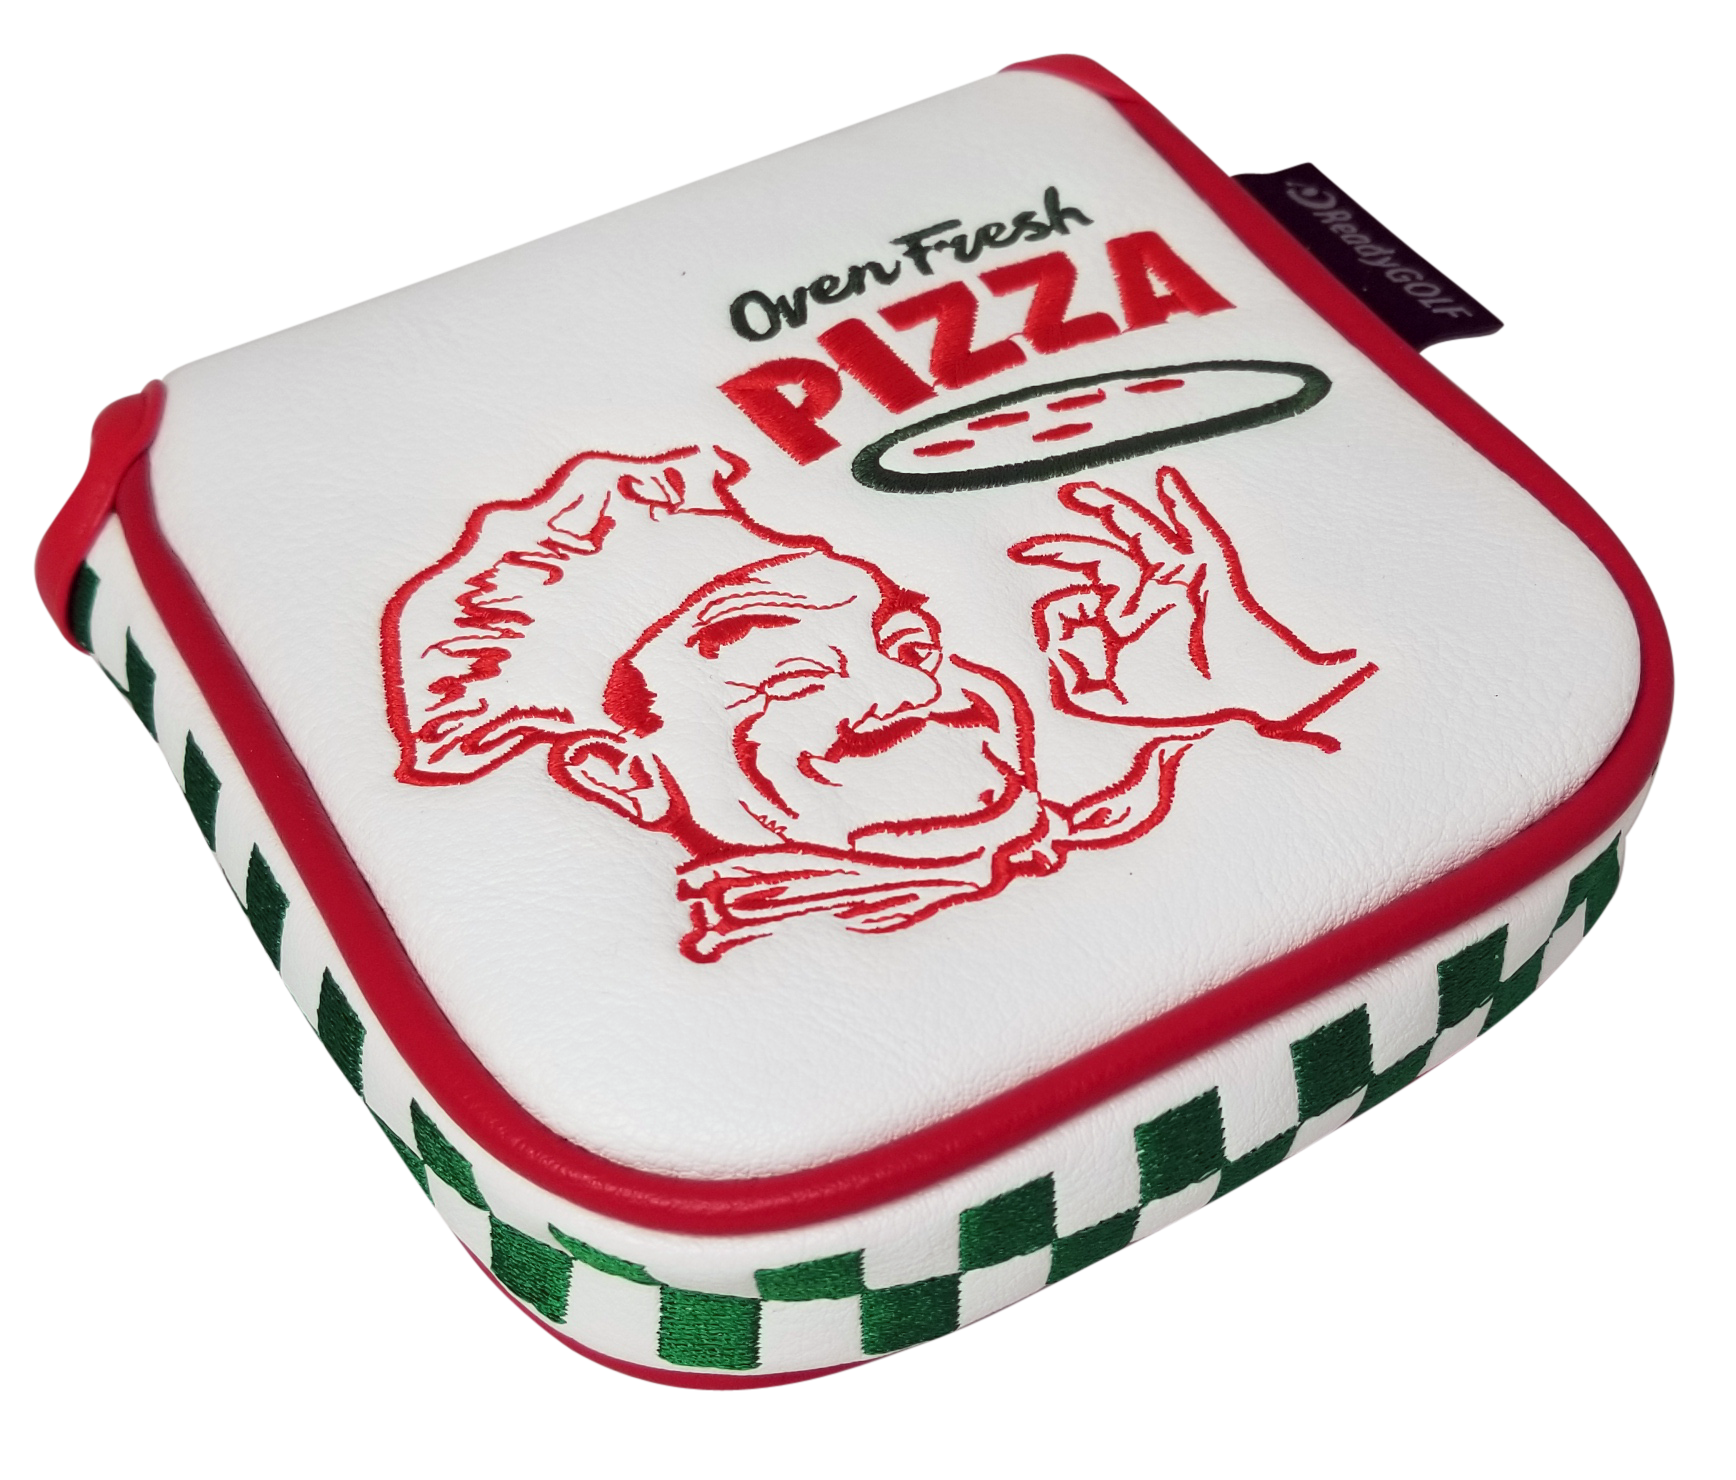 Generic Pizza Boxes